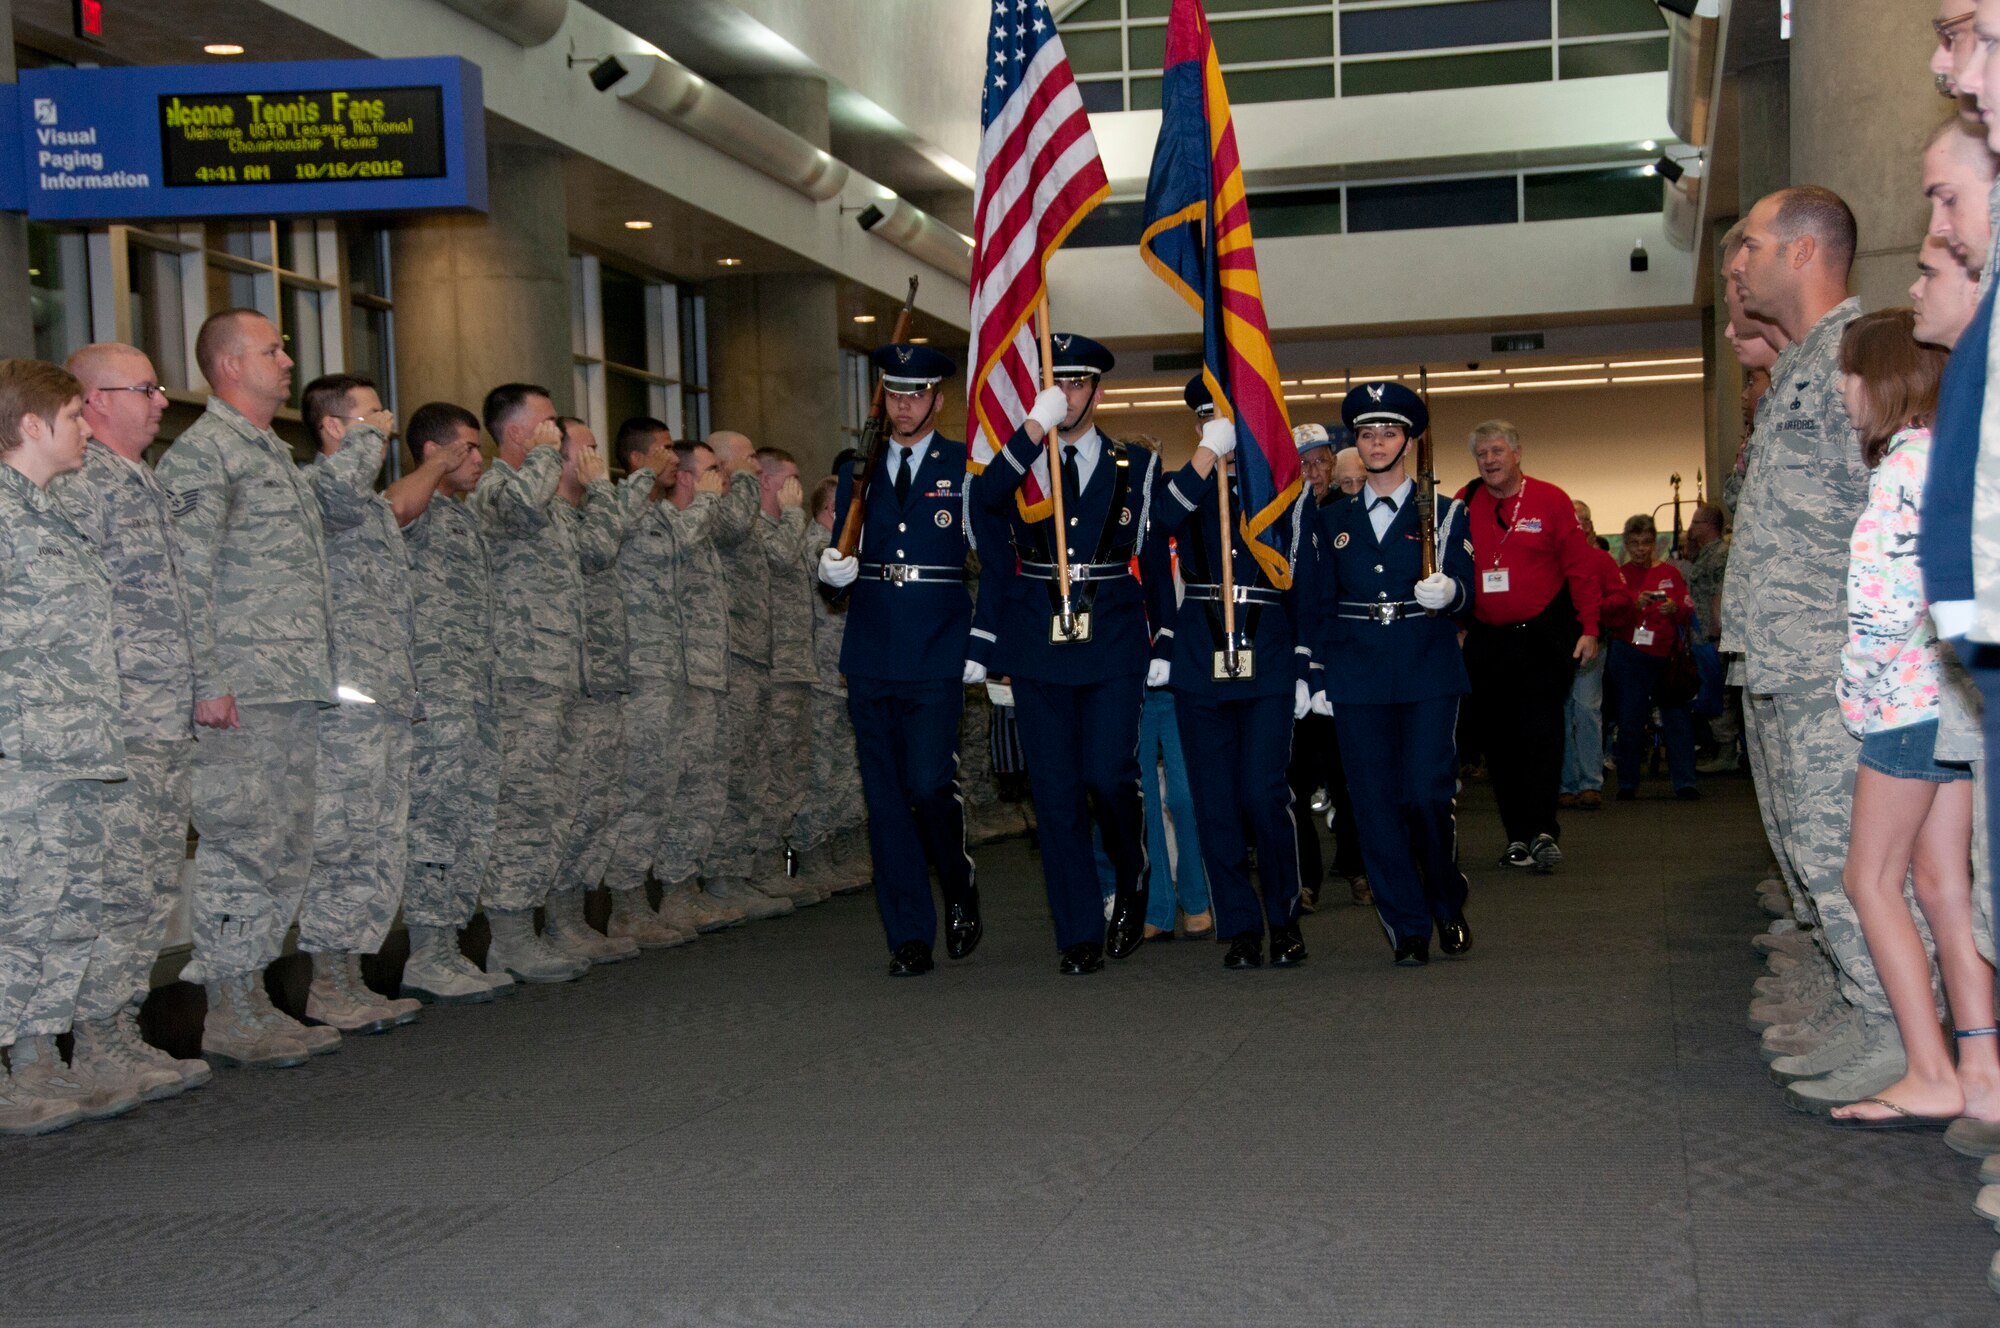 Davis-Monthan Air Force Base honor guard presents the colors during the WWII Veterans Honor Flight send-off at Tucson International Airport. (U.S. Air Force photo by Master Sgt. David Neve)